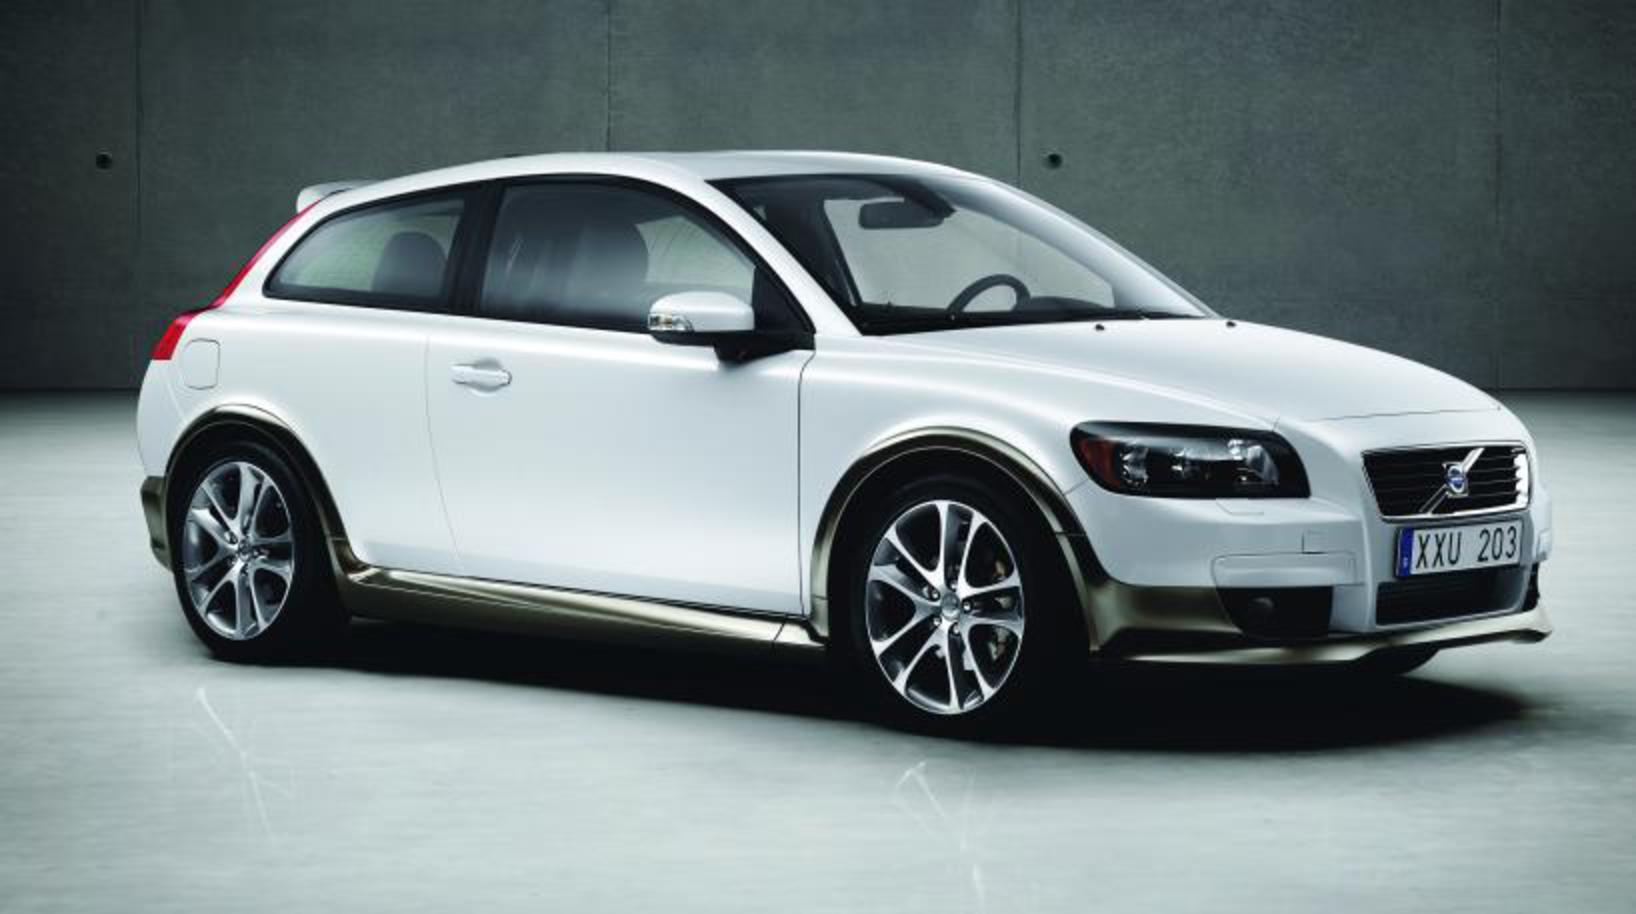 As I floored the zippy little Volvo C30 out of the showroom, the car dealer